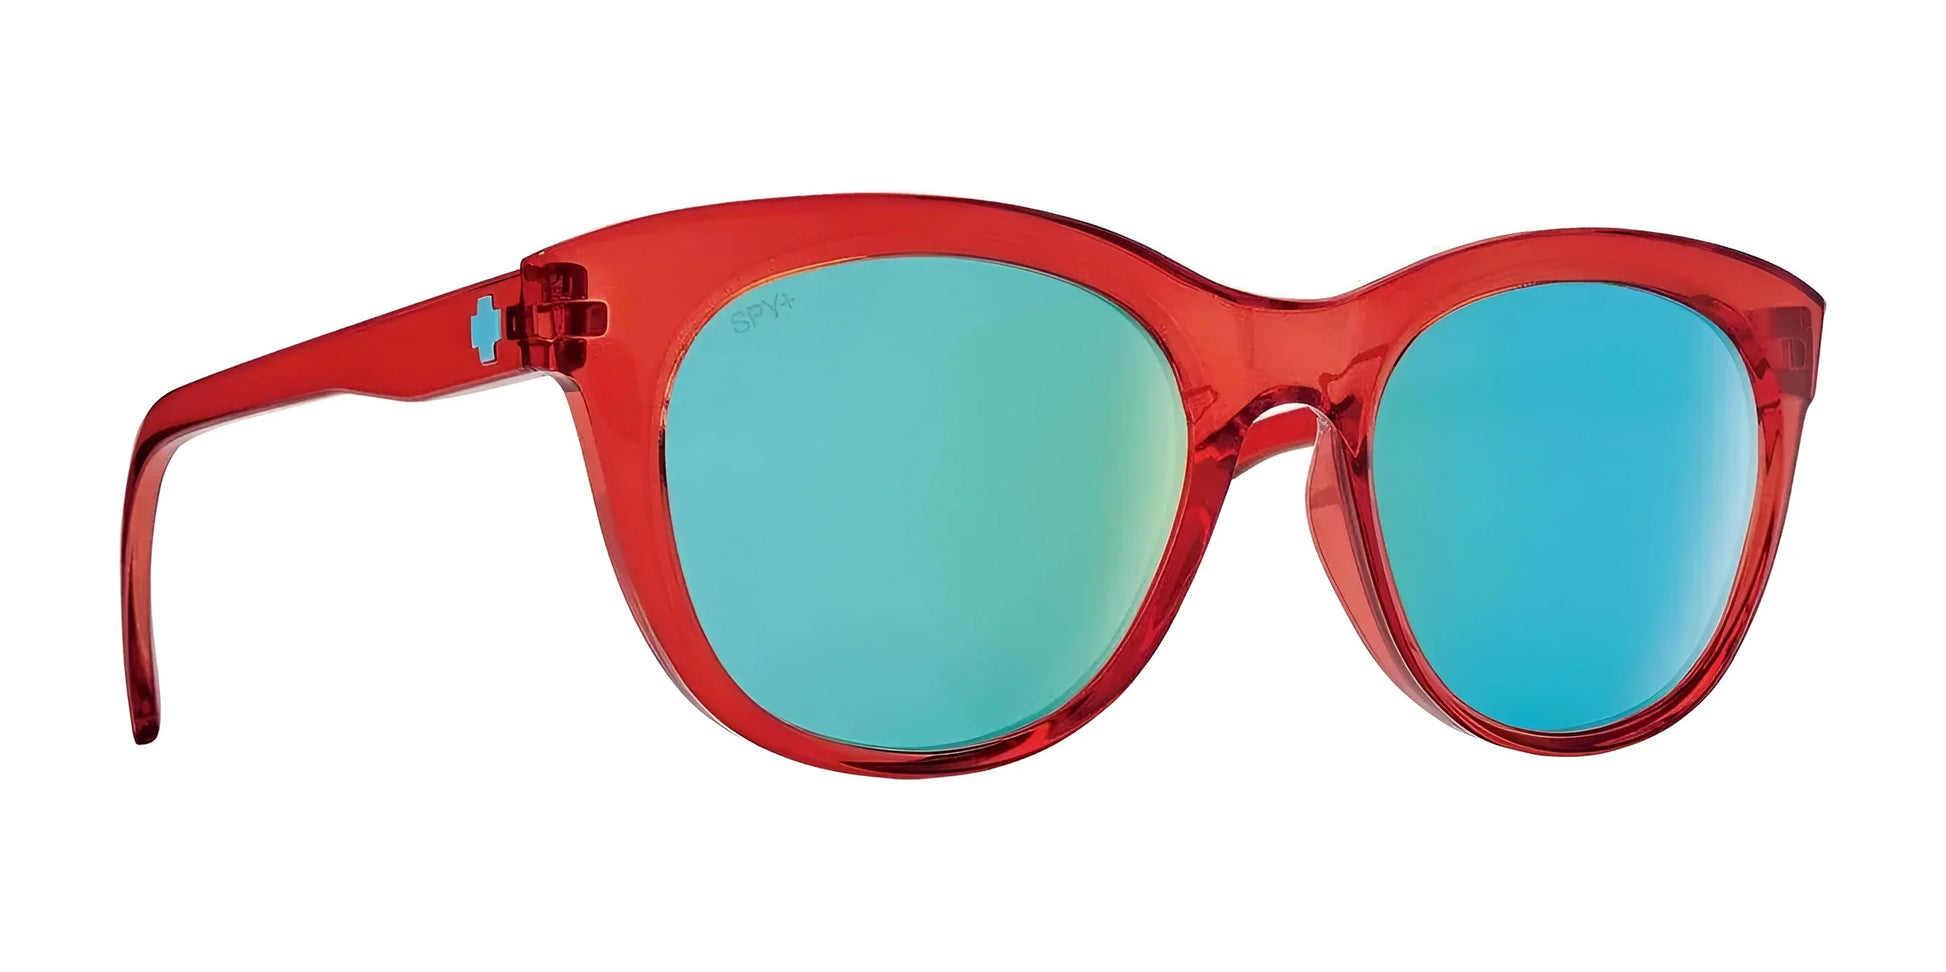 SPY BOUNDLESS Sunglasses Translucent Red / Bronze with Light Blue spectra Mirror